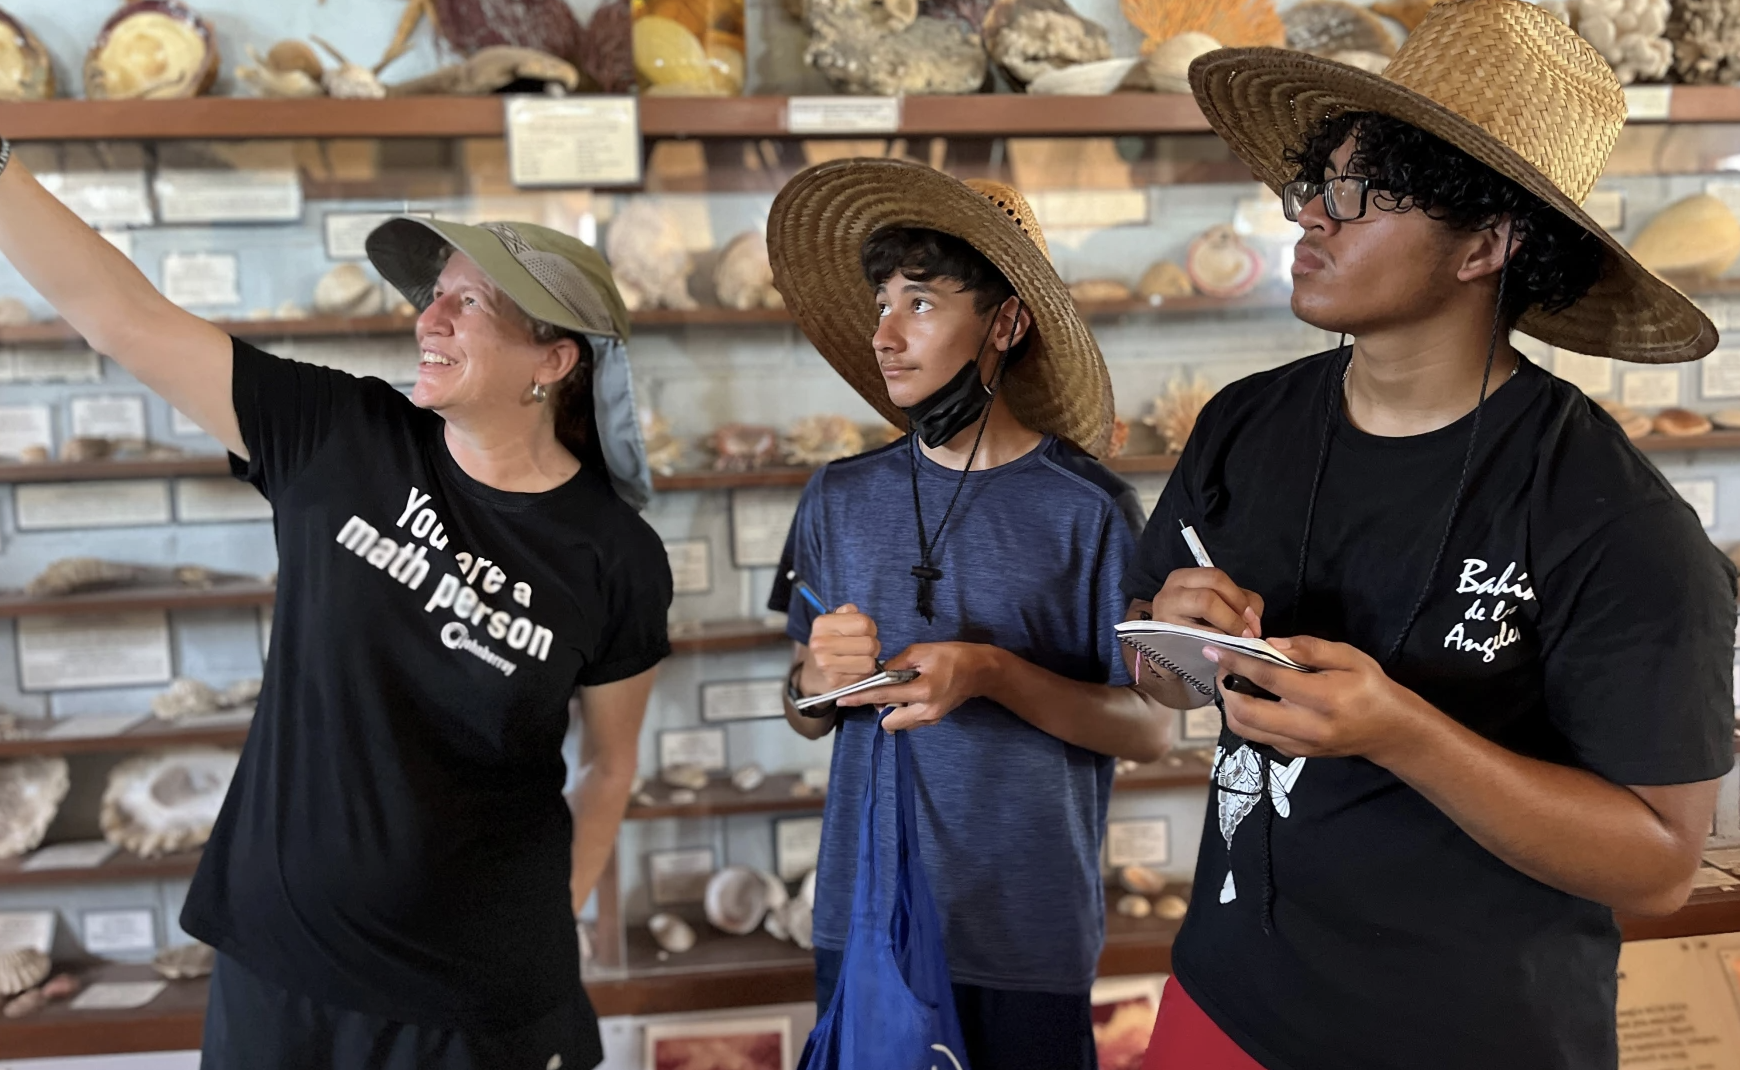 Underserved high school students go to Baja California for science experience